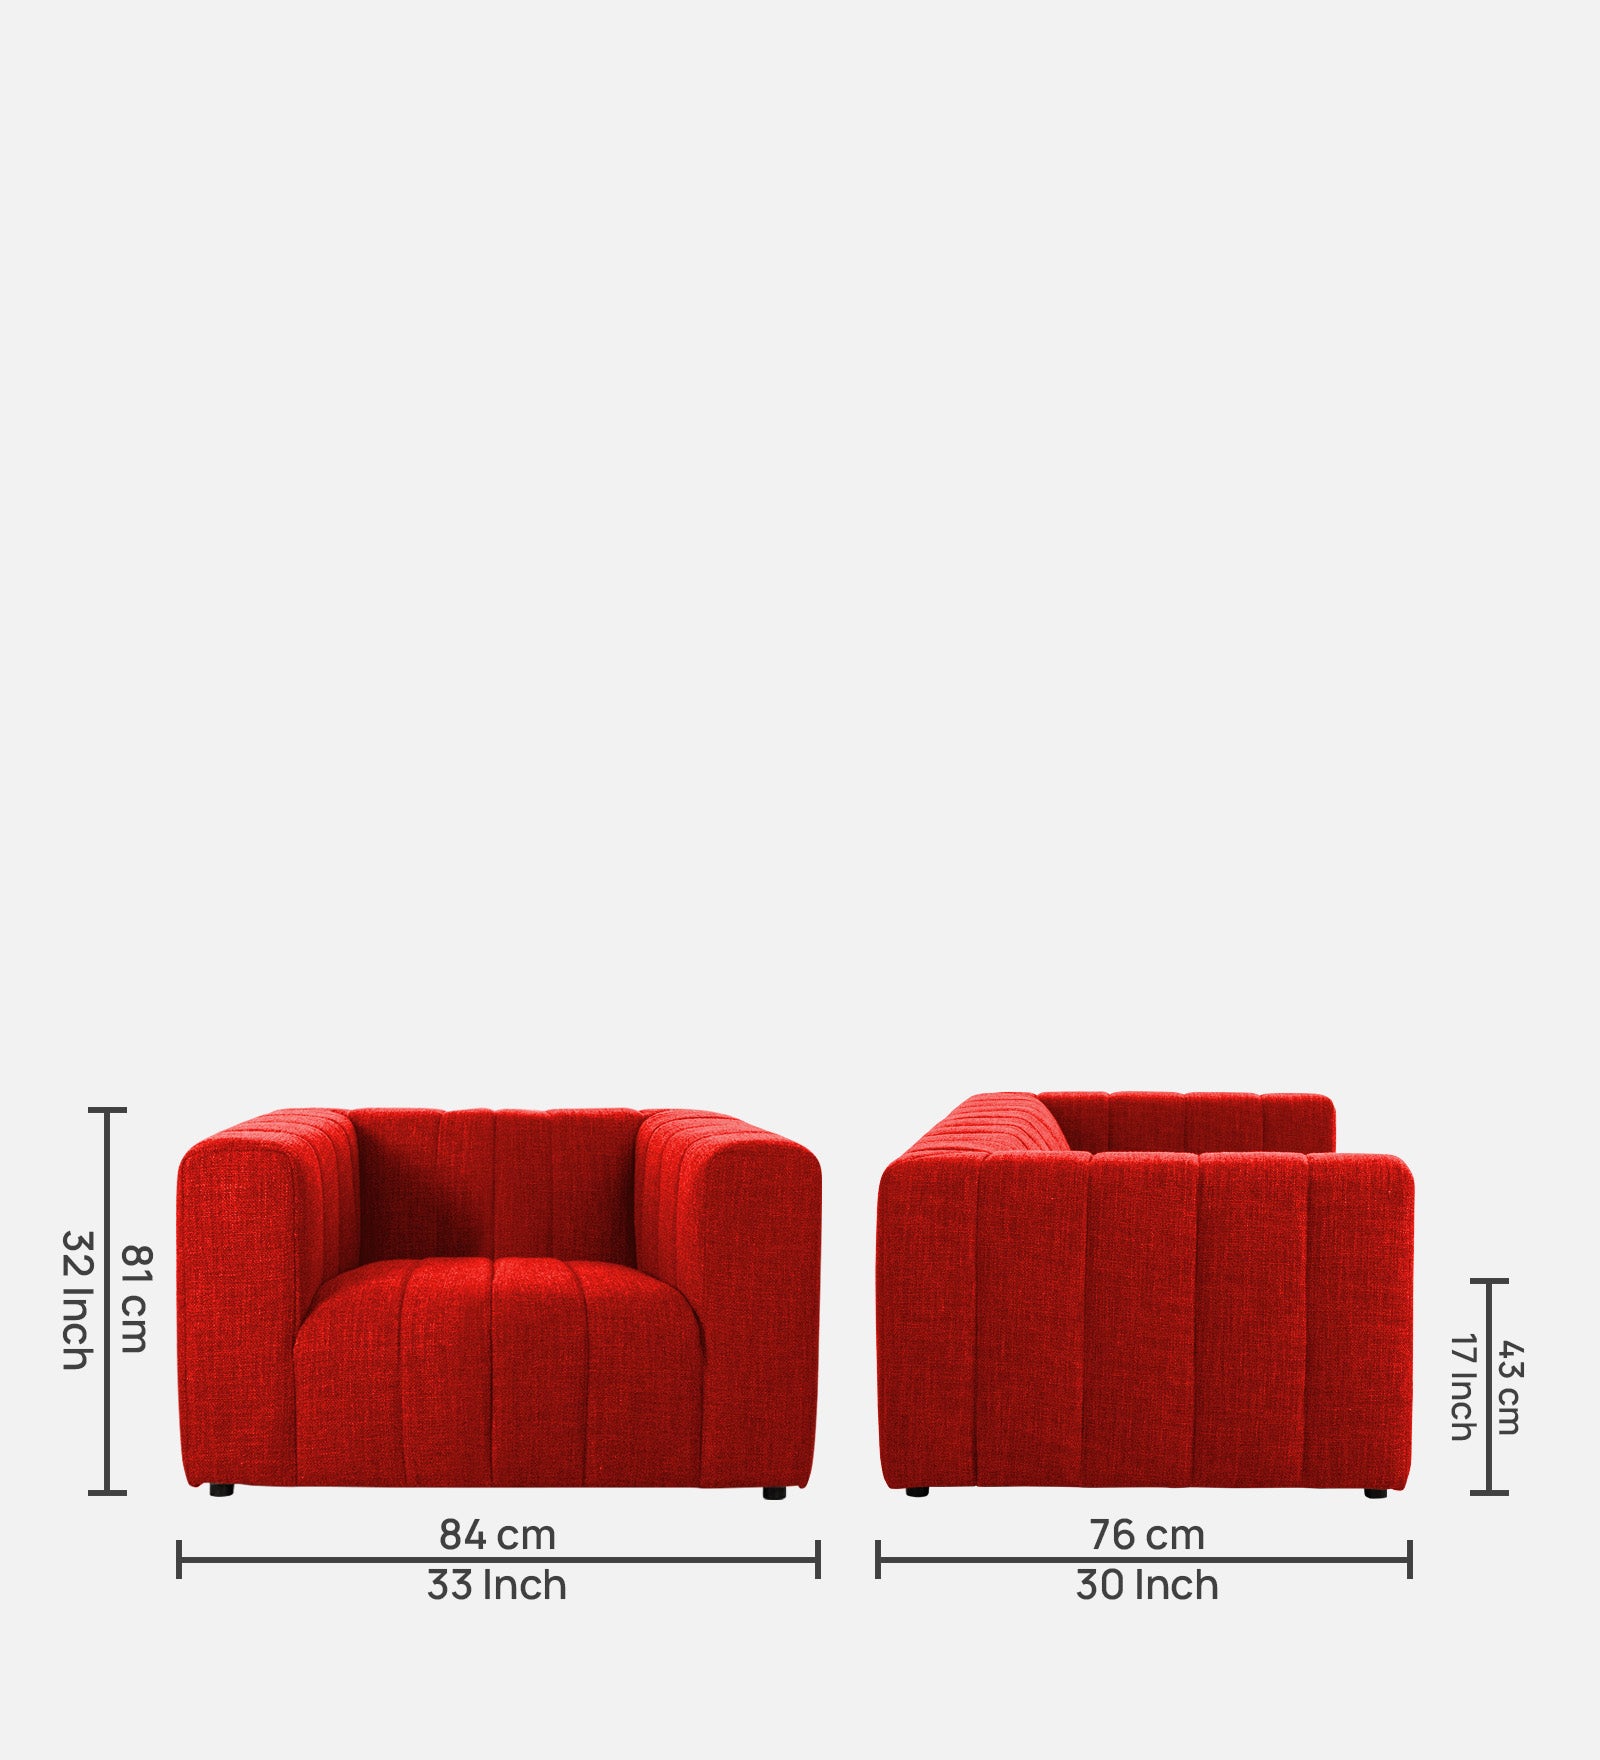 Lara Fabric 1 Seater Sofa in Ruby Red Colour